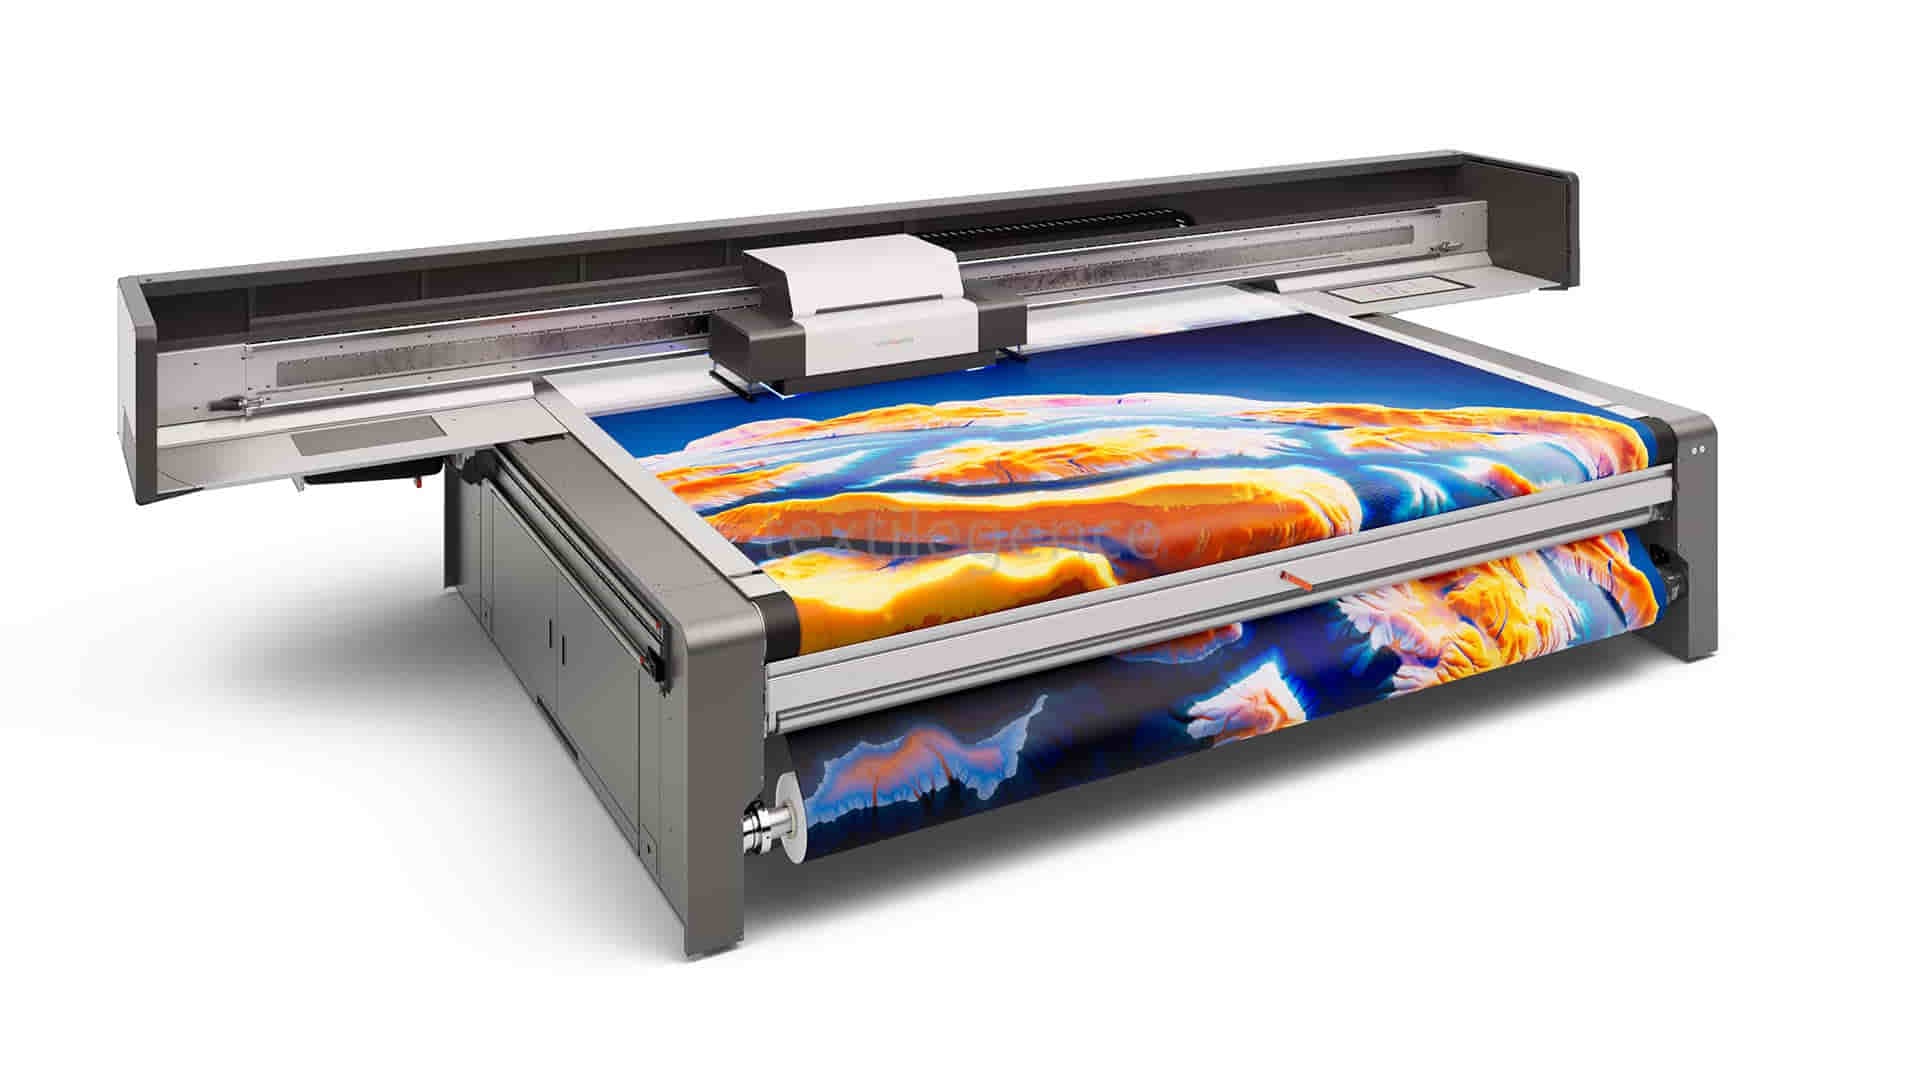 swissQprint is preferred for its technology and versatility in application   Image Source: swissQprint